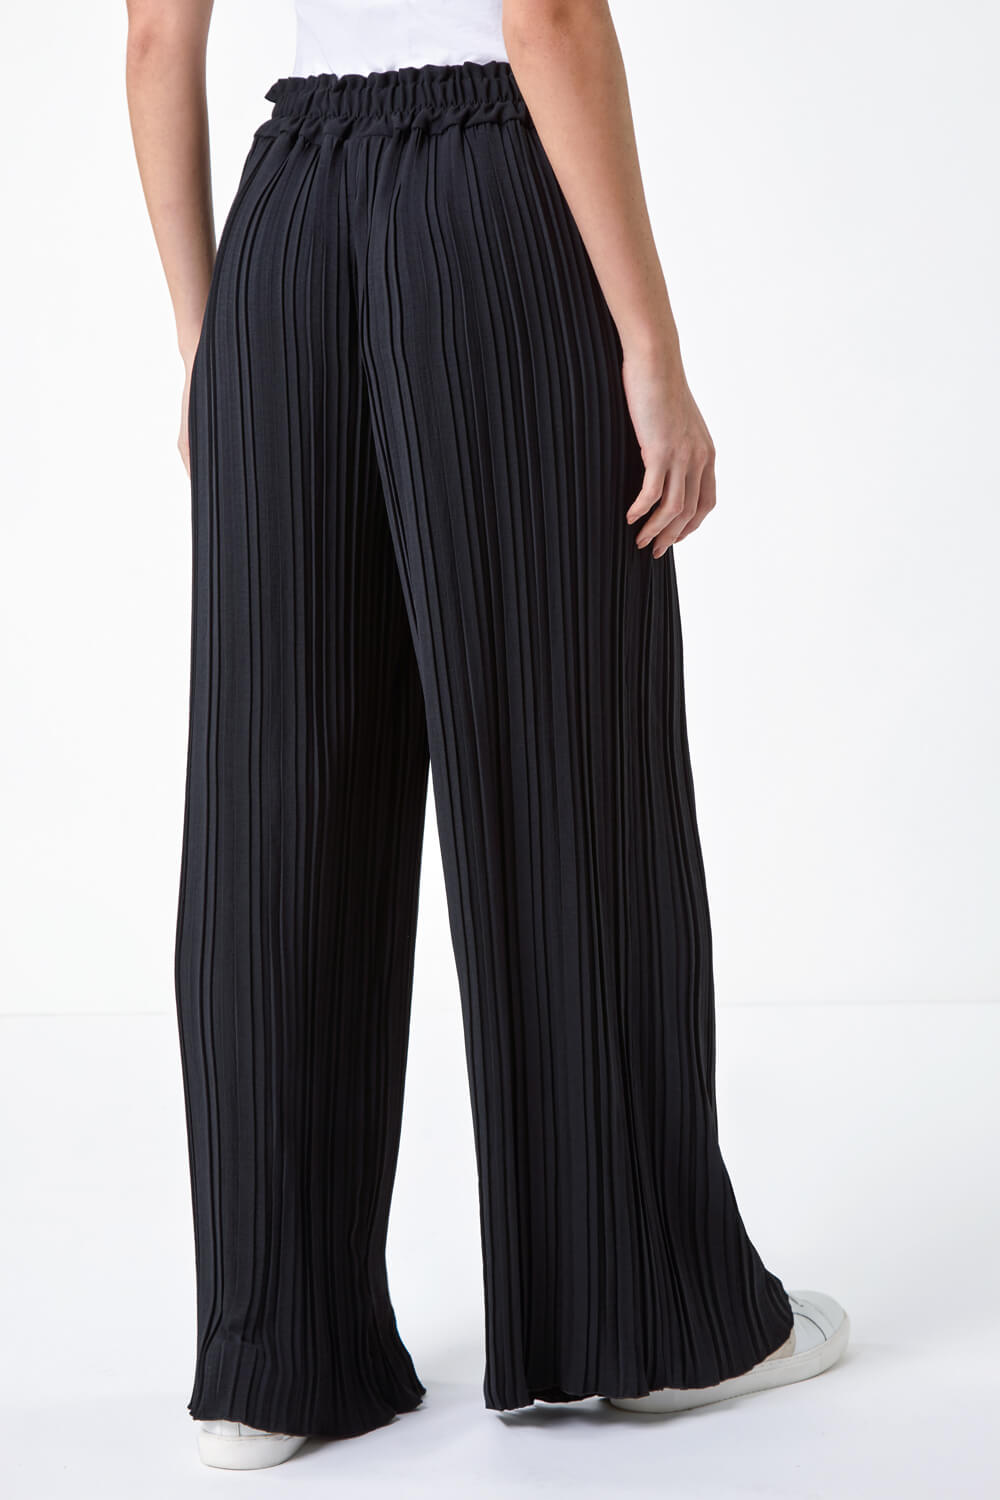 Black Pleated Tie Waist Stretch Trousers, Image 3 of 5